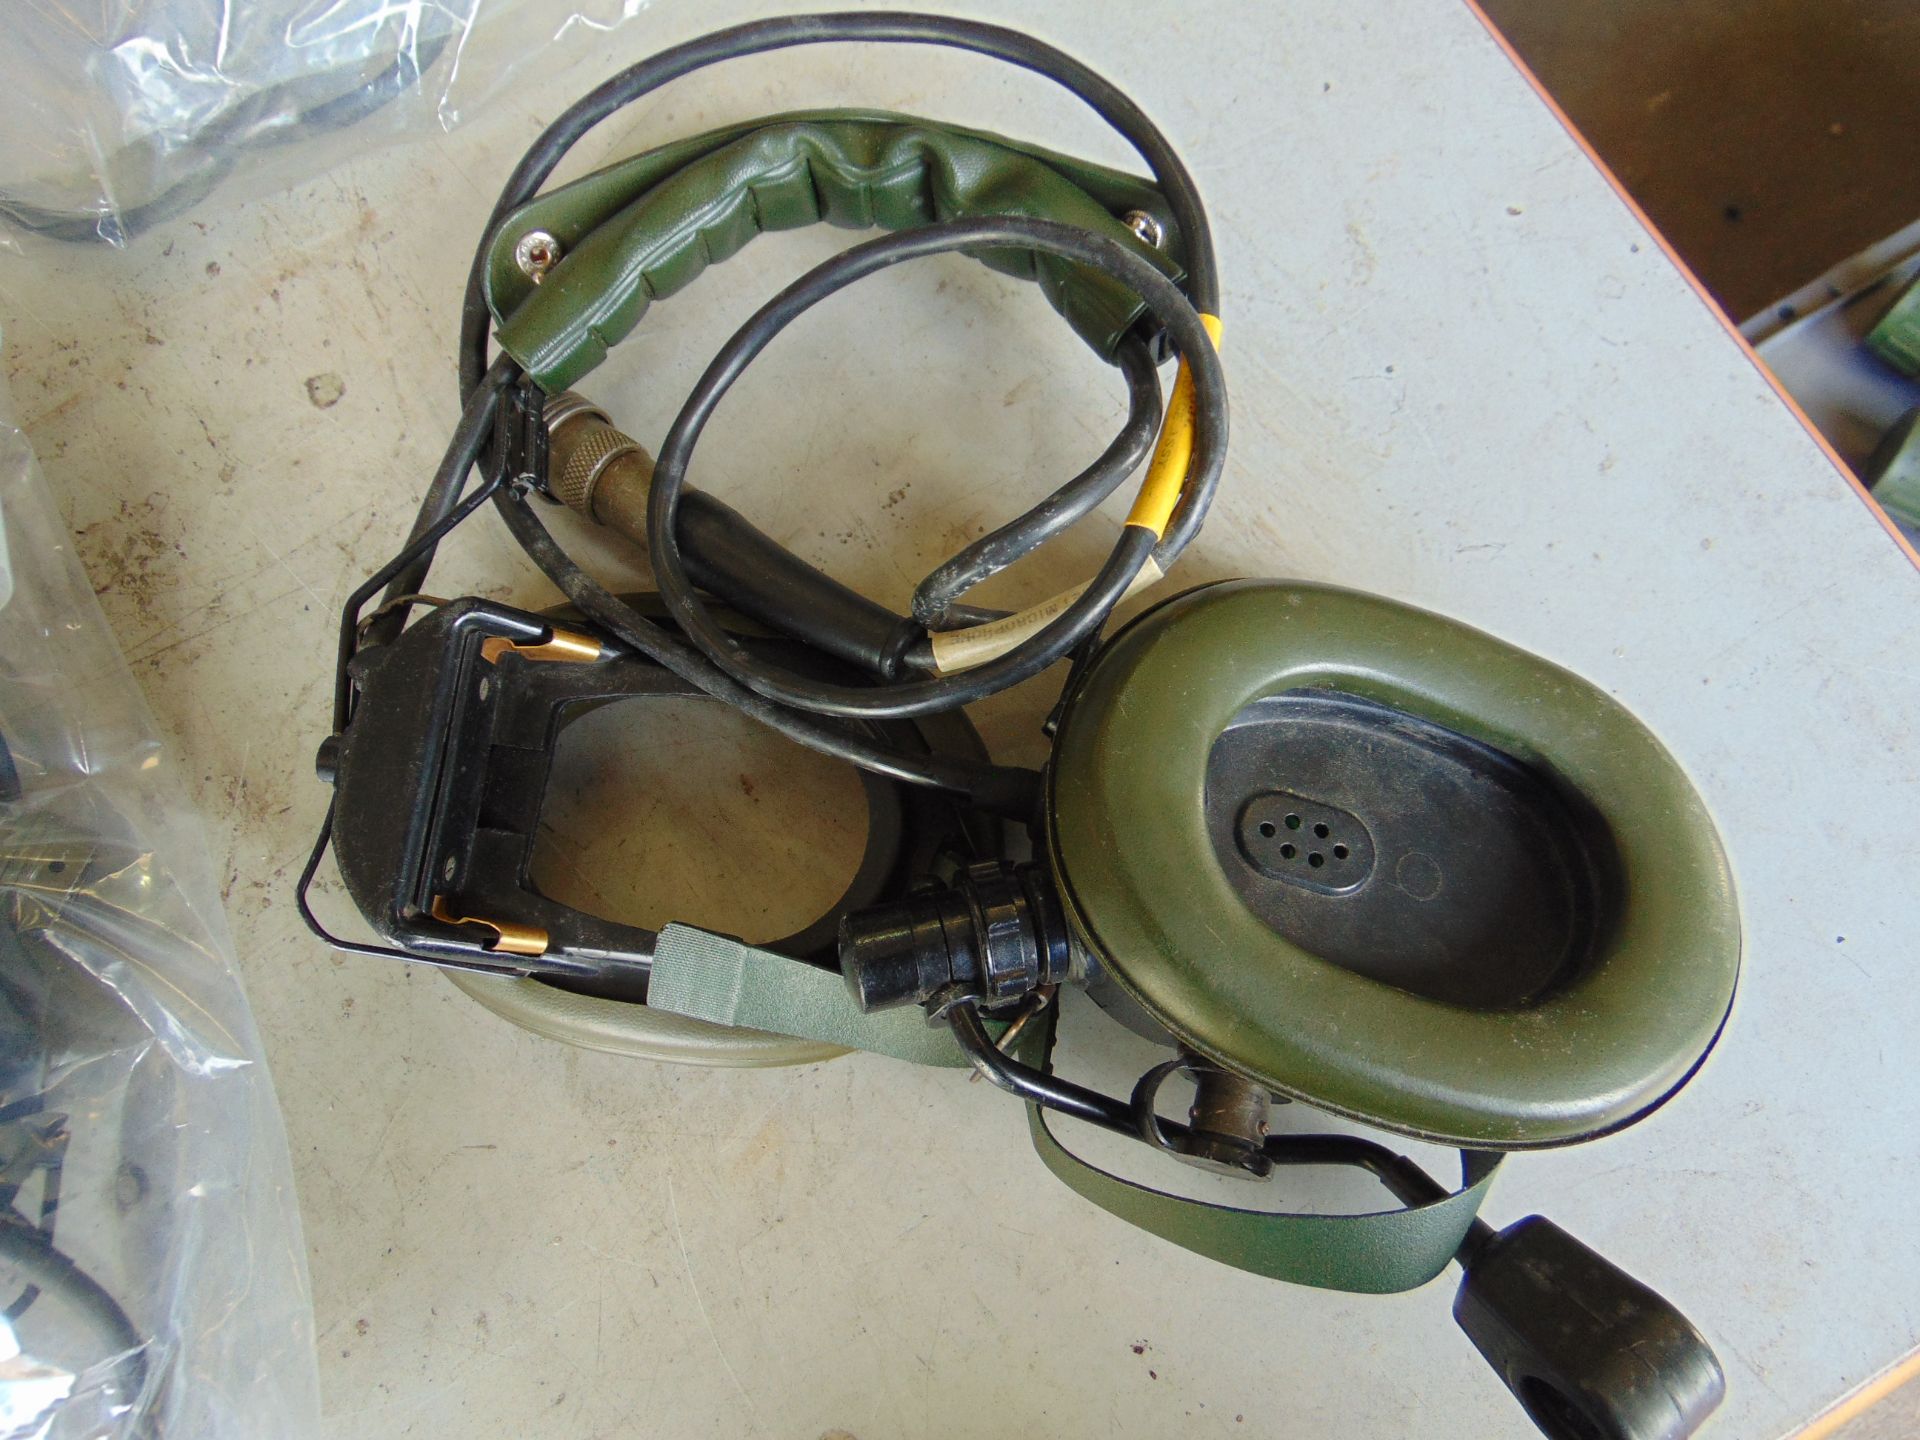 8X HEADSET MICROPHONES AS SHOWN - Image 4 of 4